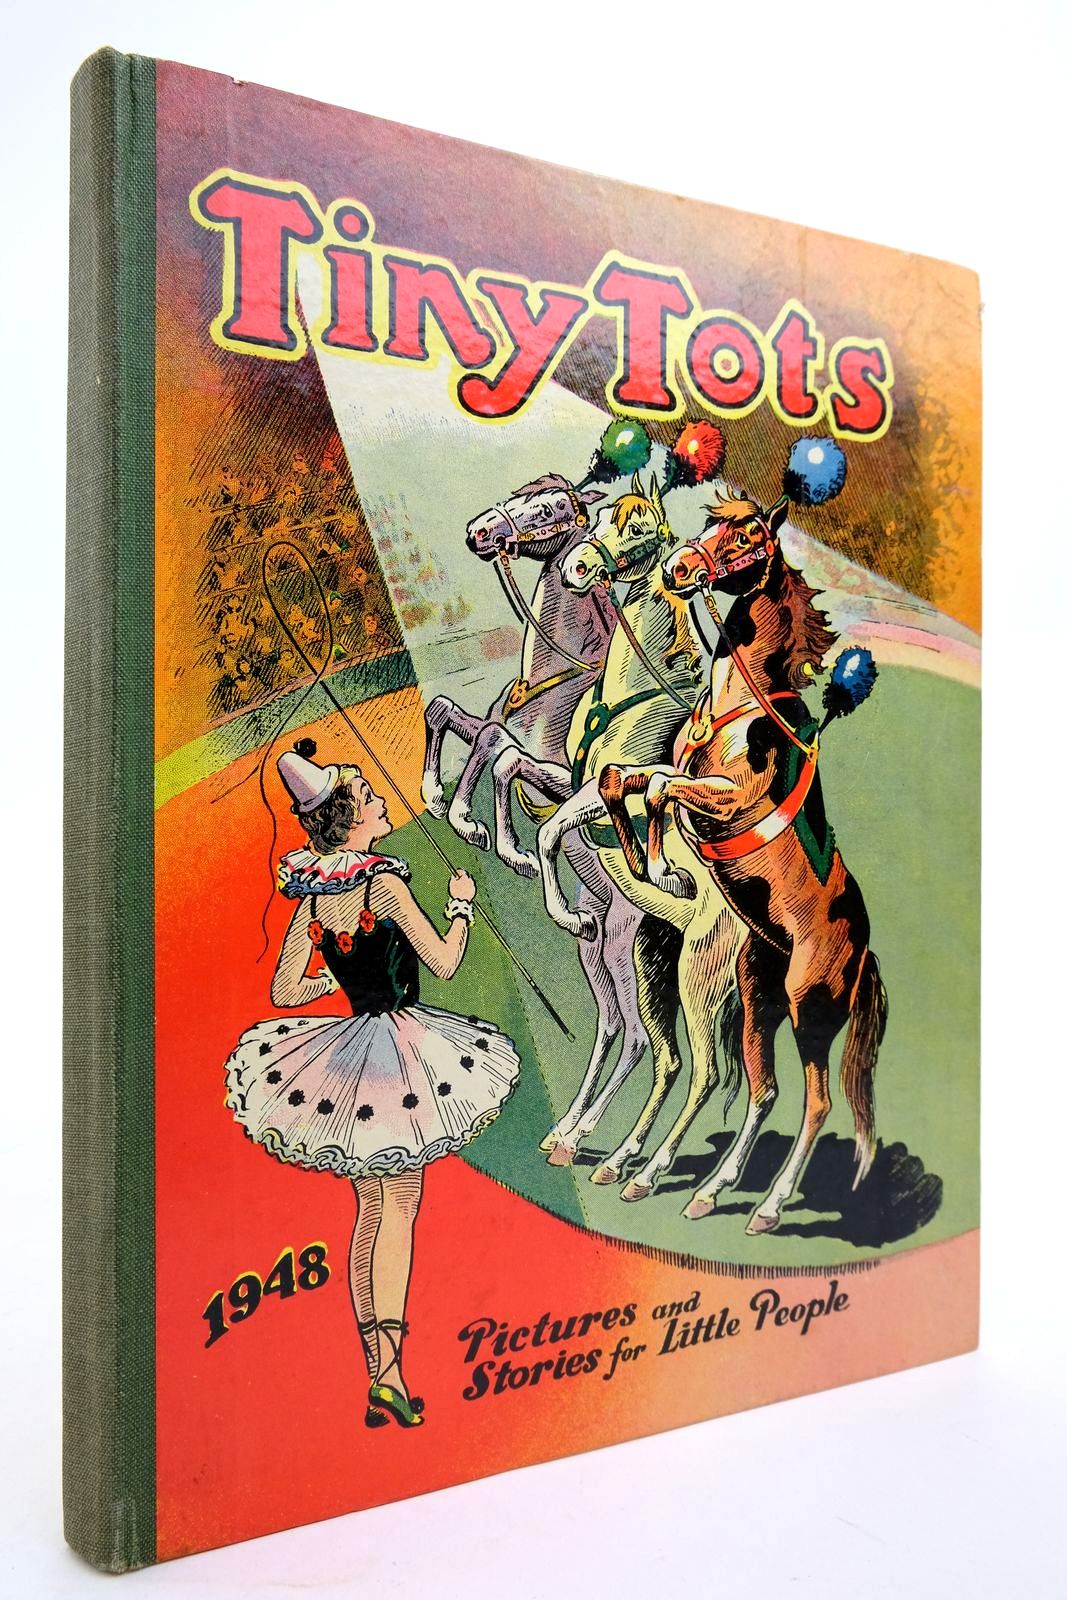 Photo of TINY TOTS ANNUAL 1948 illustrated by Holt, G.M. published by The Amalgamated Press (STOCK CODE: 2140904)  for sale by Stella & Rose's Books